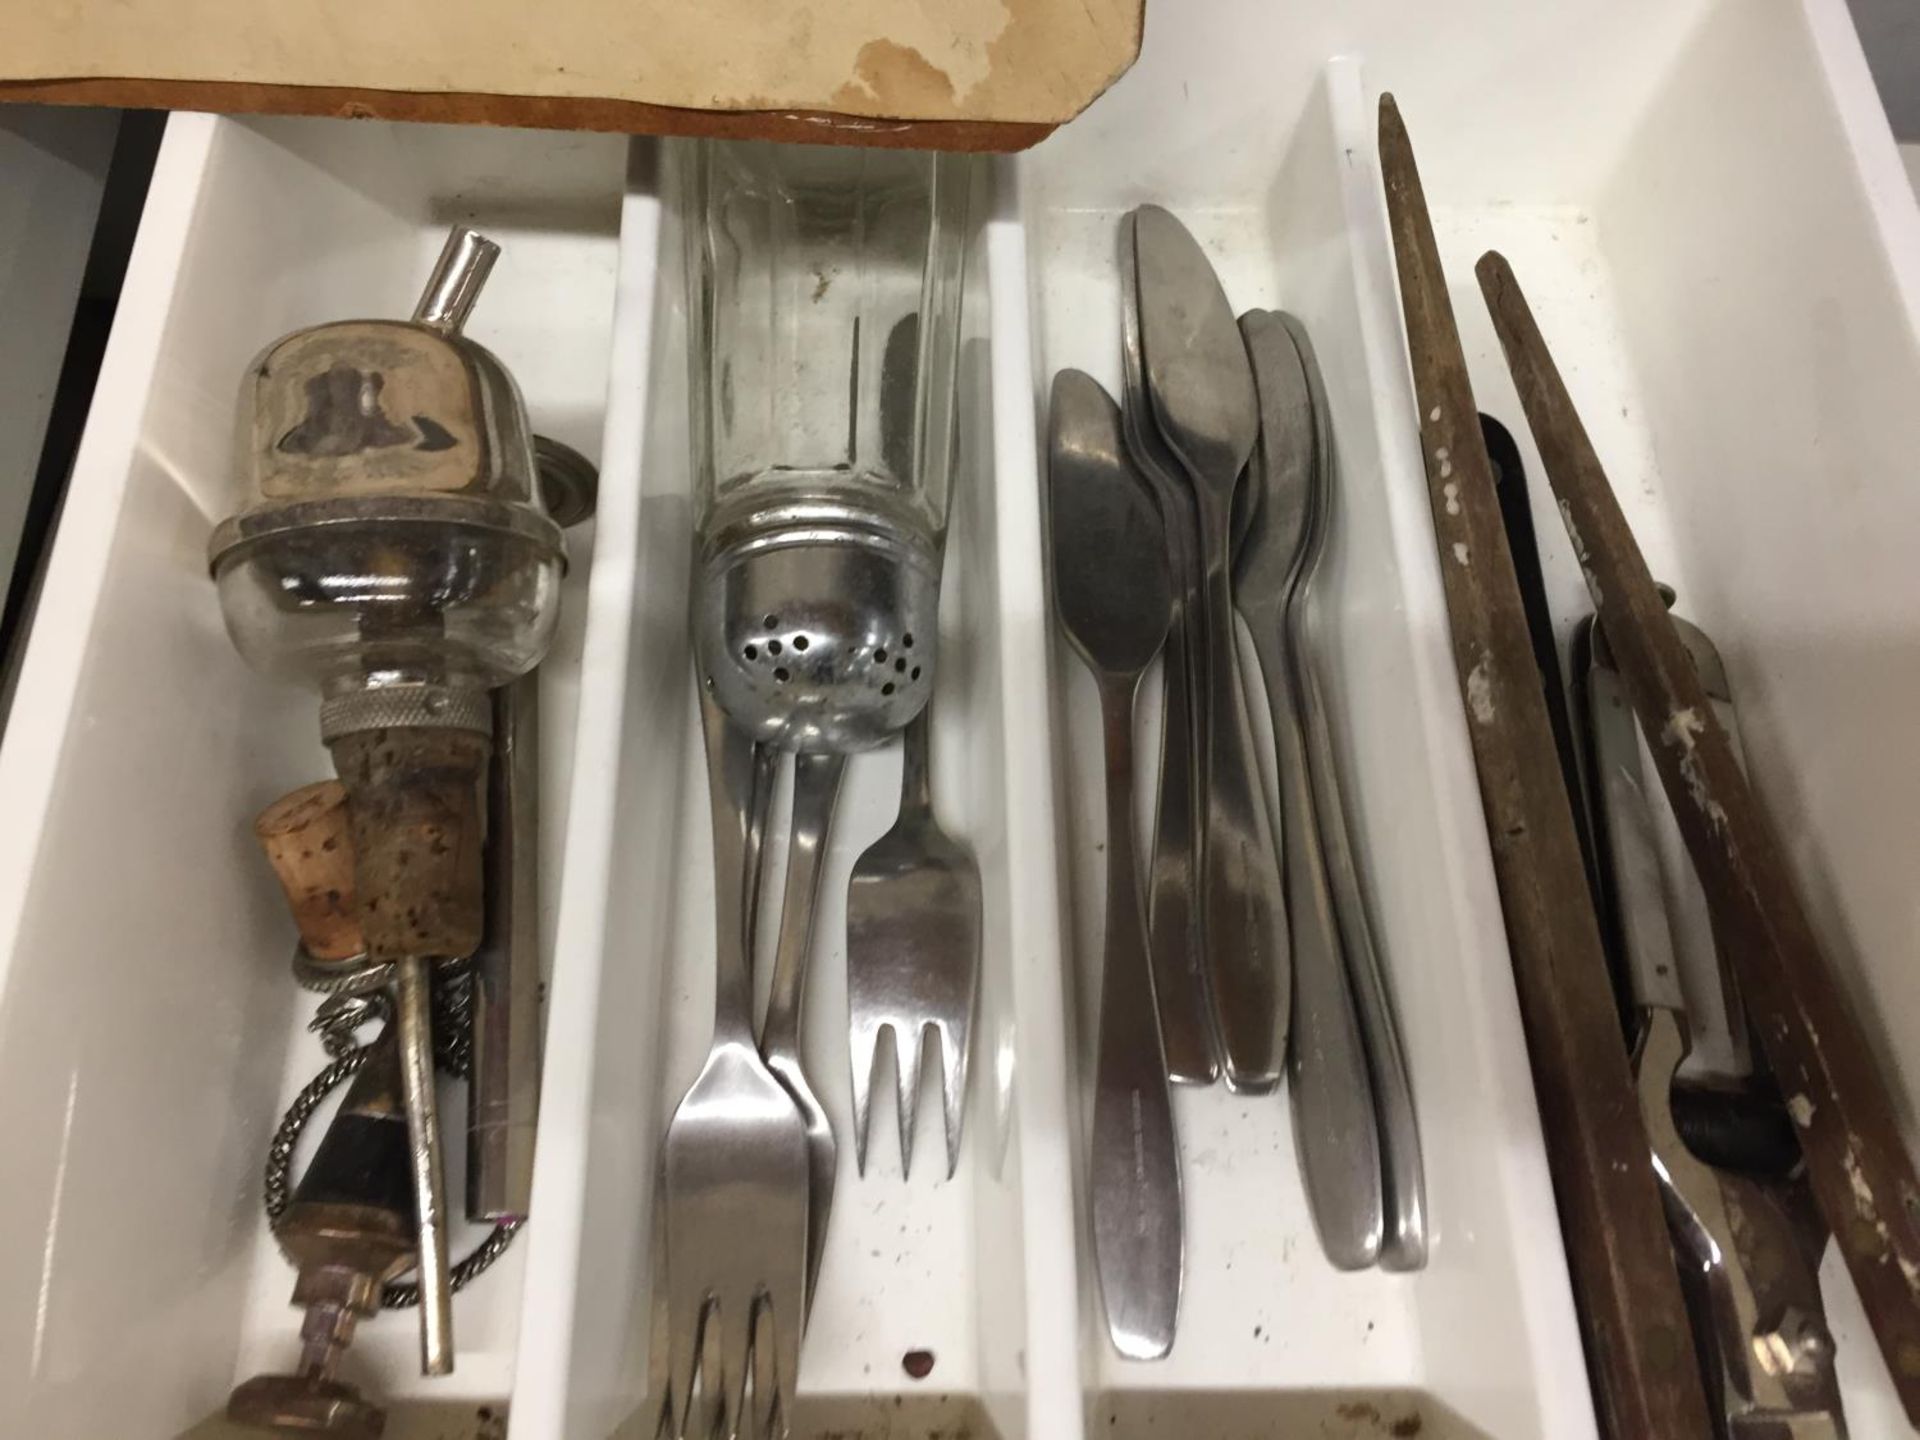 A QUANTITY OF FLATWARE IN A TRAY TO INCLUDE SALAD SERVERS, KNIVES, FORKS, TEA CADDY SPOONS, BOTTLE - Image 2 of 3